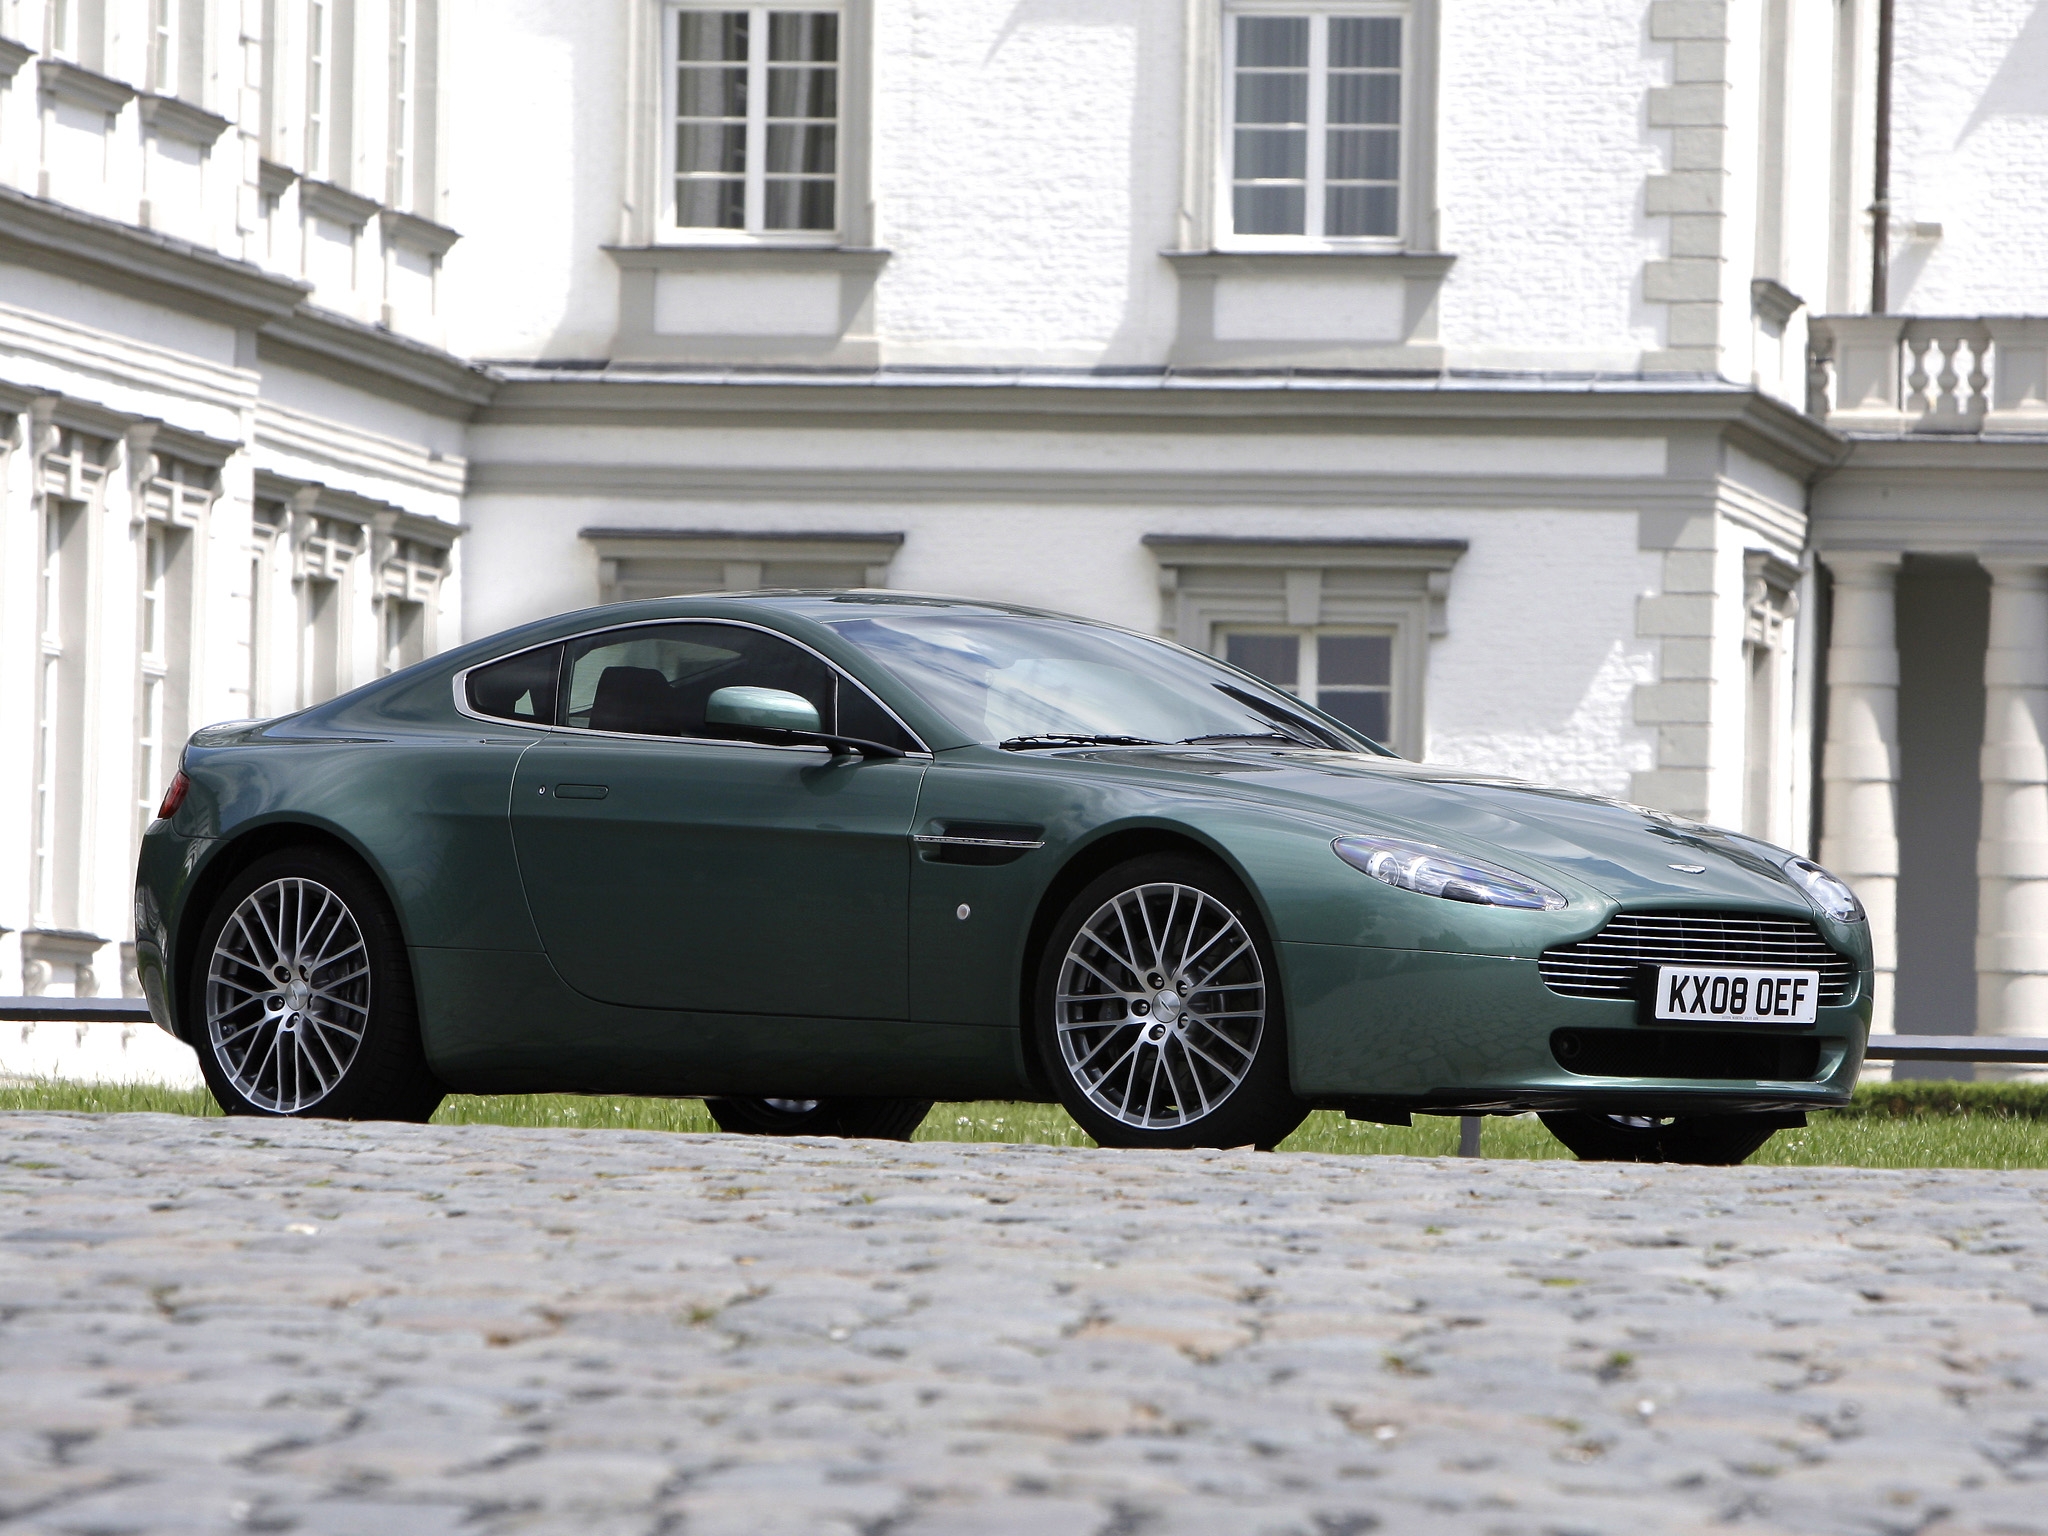 cars, aston martin, green, building, side view, style, 2008, v8, vantage cellphone